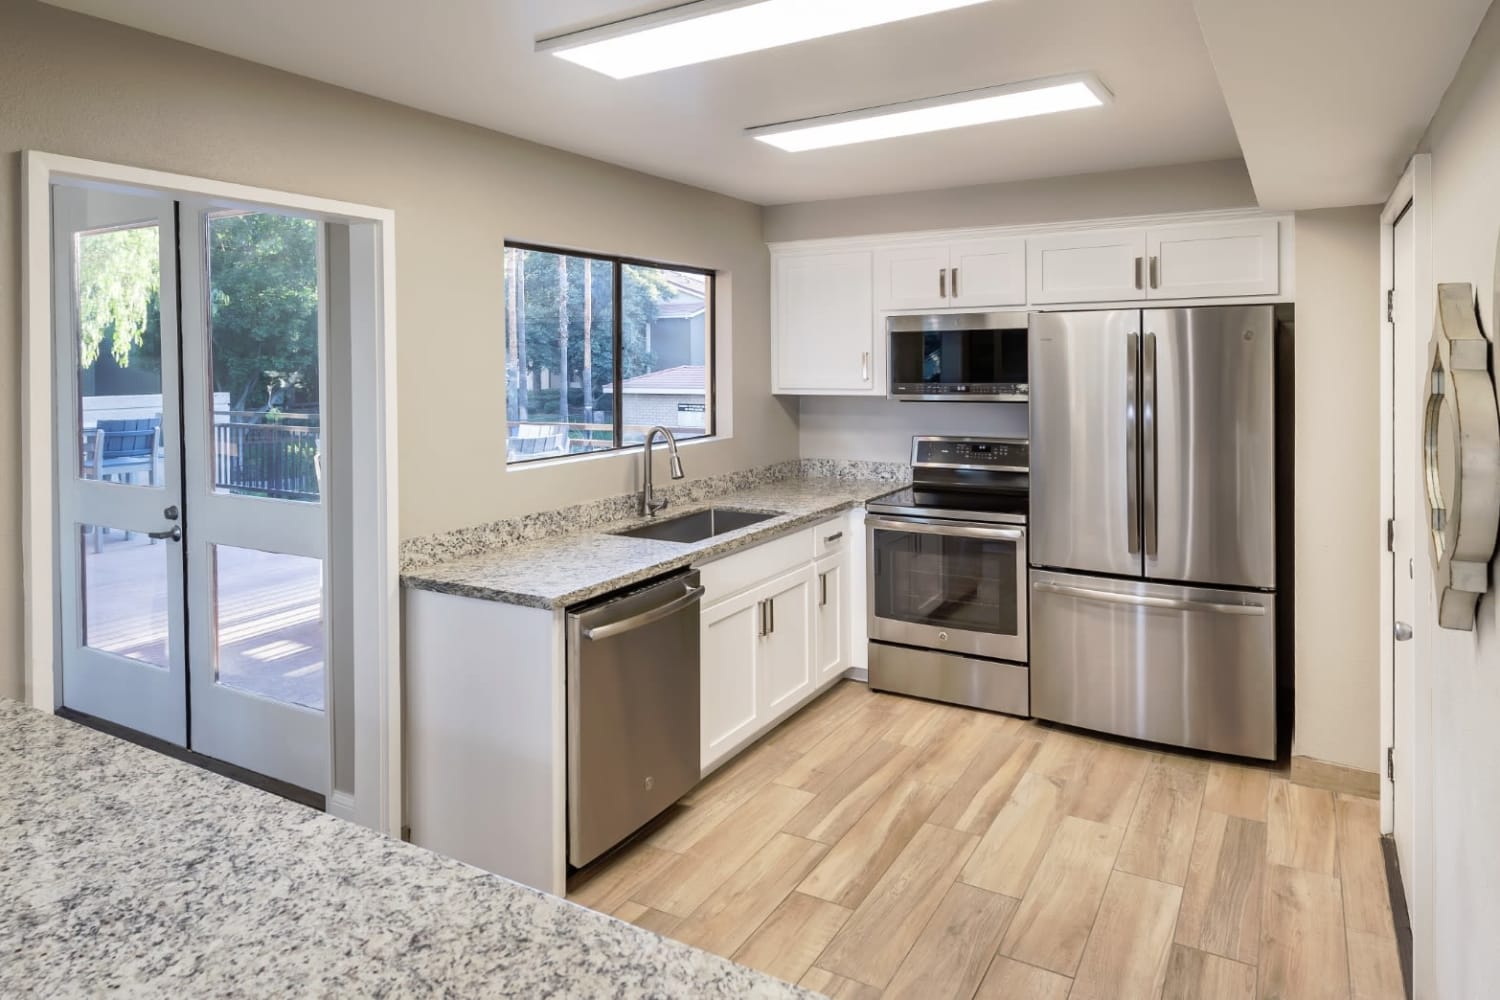 Enjoy a large updated kitchen at Parcwood Apartments in Corona, California